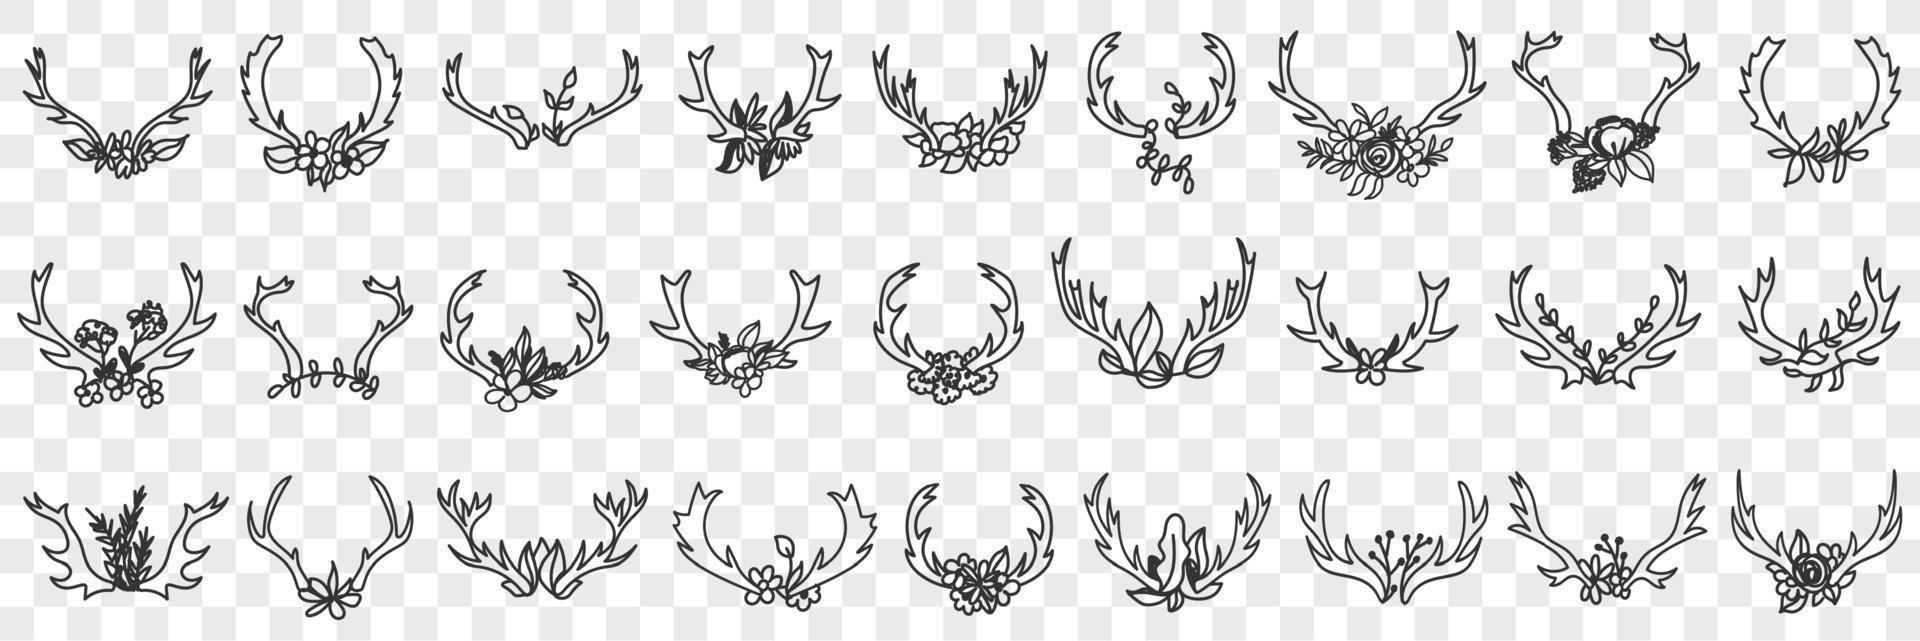 Deers horns as decorations doodle set. Collection of hand drawn various horns of wild deers animals for hanging in interiors as decorations isolated on transparent background vector